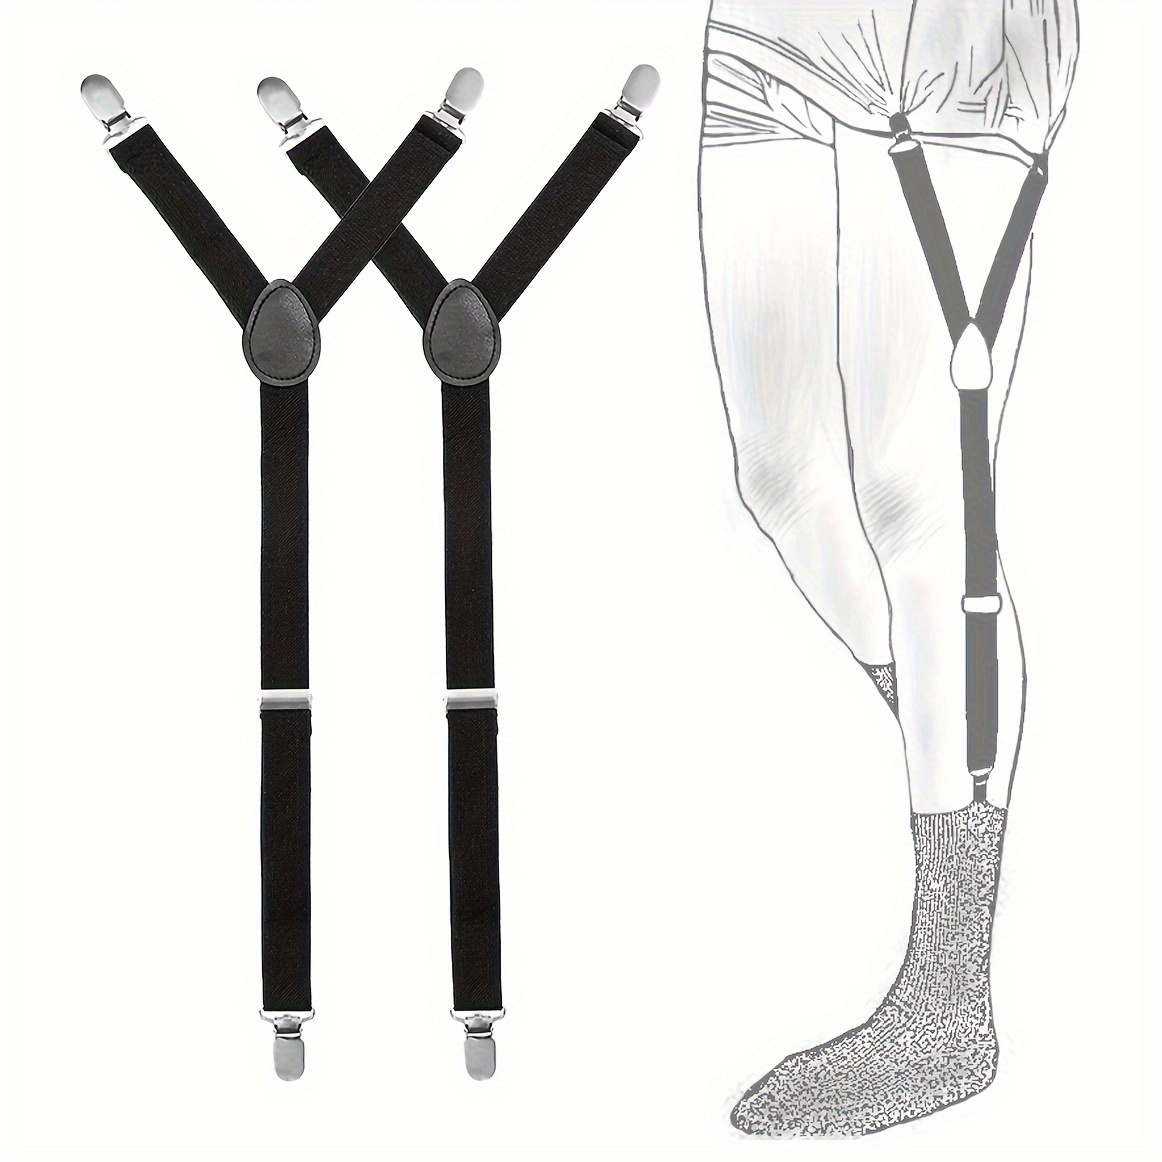 

2pcs Y-style Shirt Stays, Shirt Holders For Keeping Shirt Tucked In And Sock Suspenders, Adjustable Elastic Straps, Black